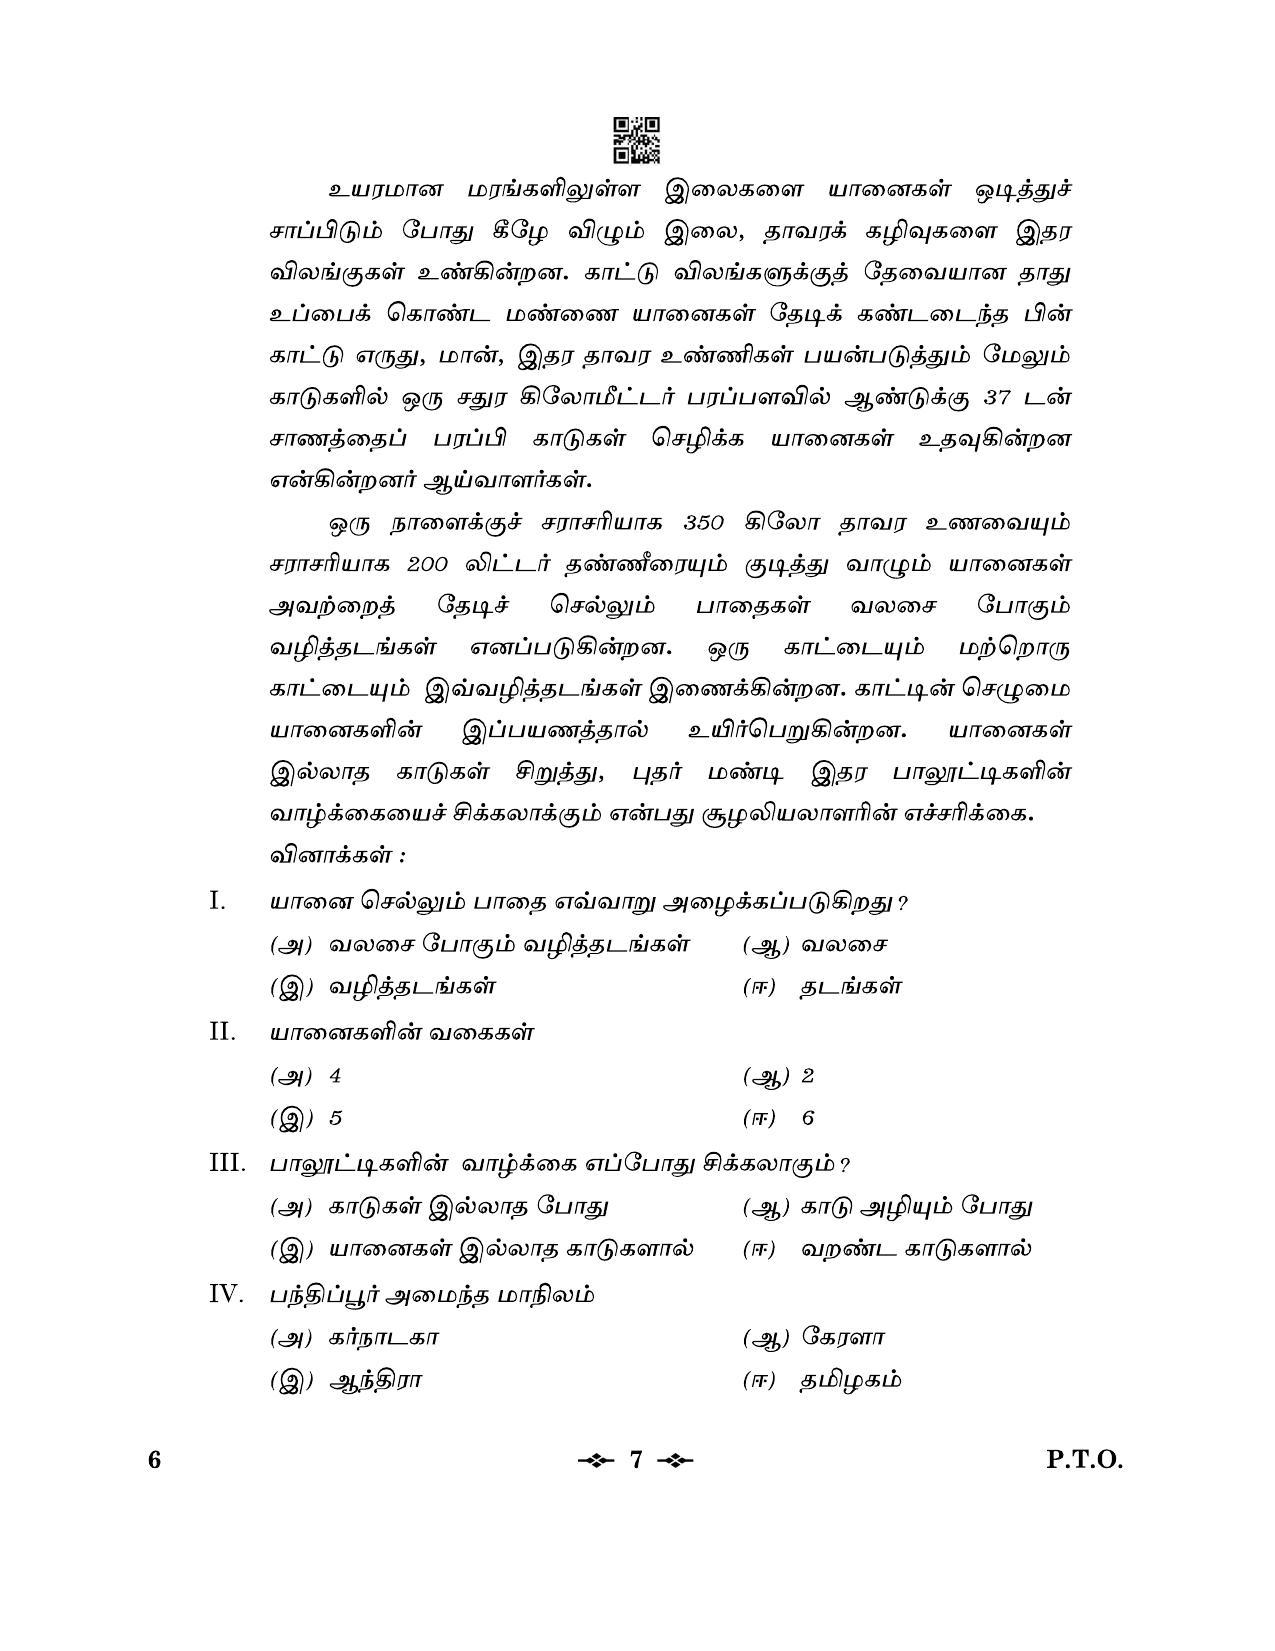 CBSE Class 12 6_Tamil 2023 Question Paper - Page 7